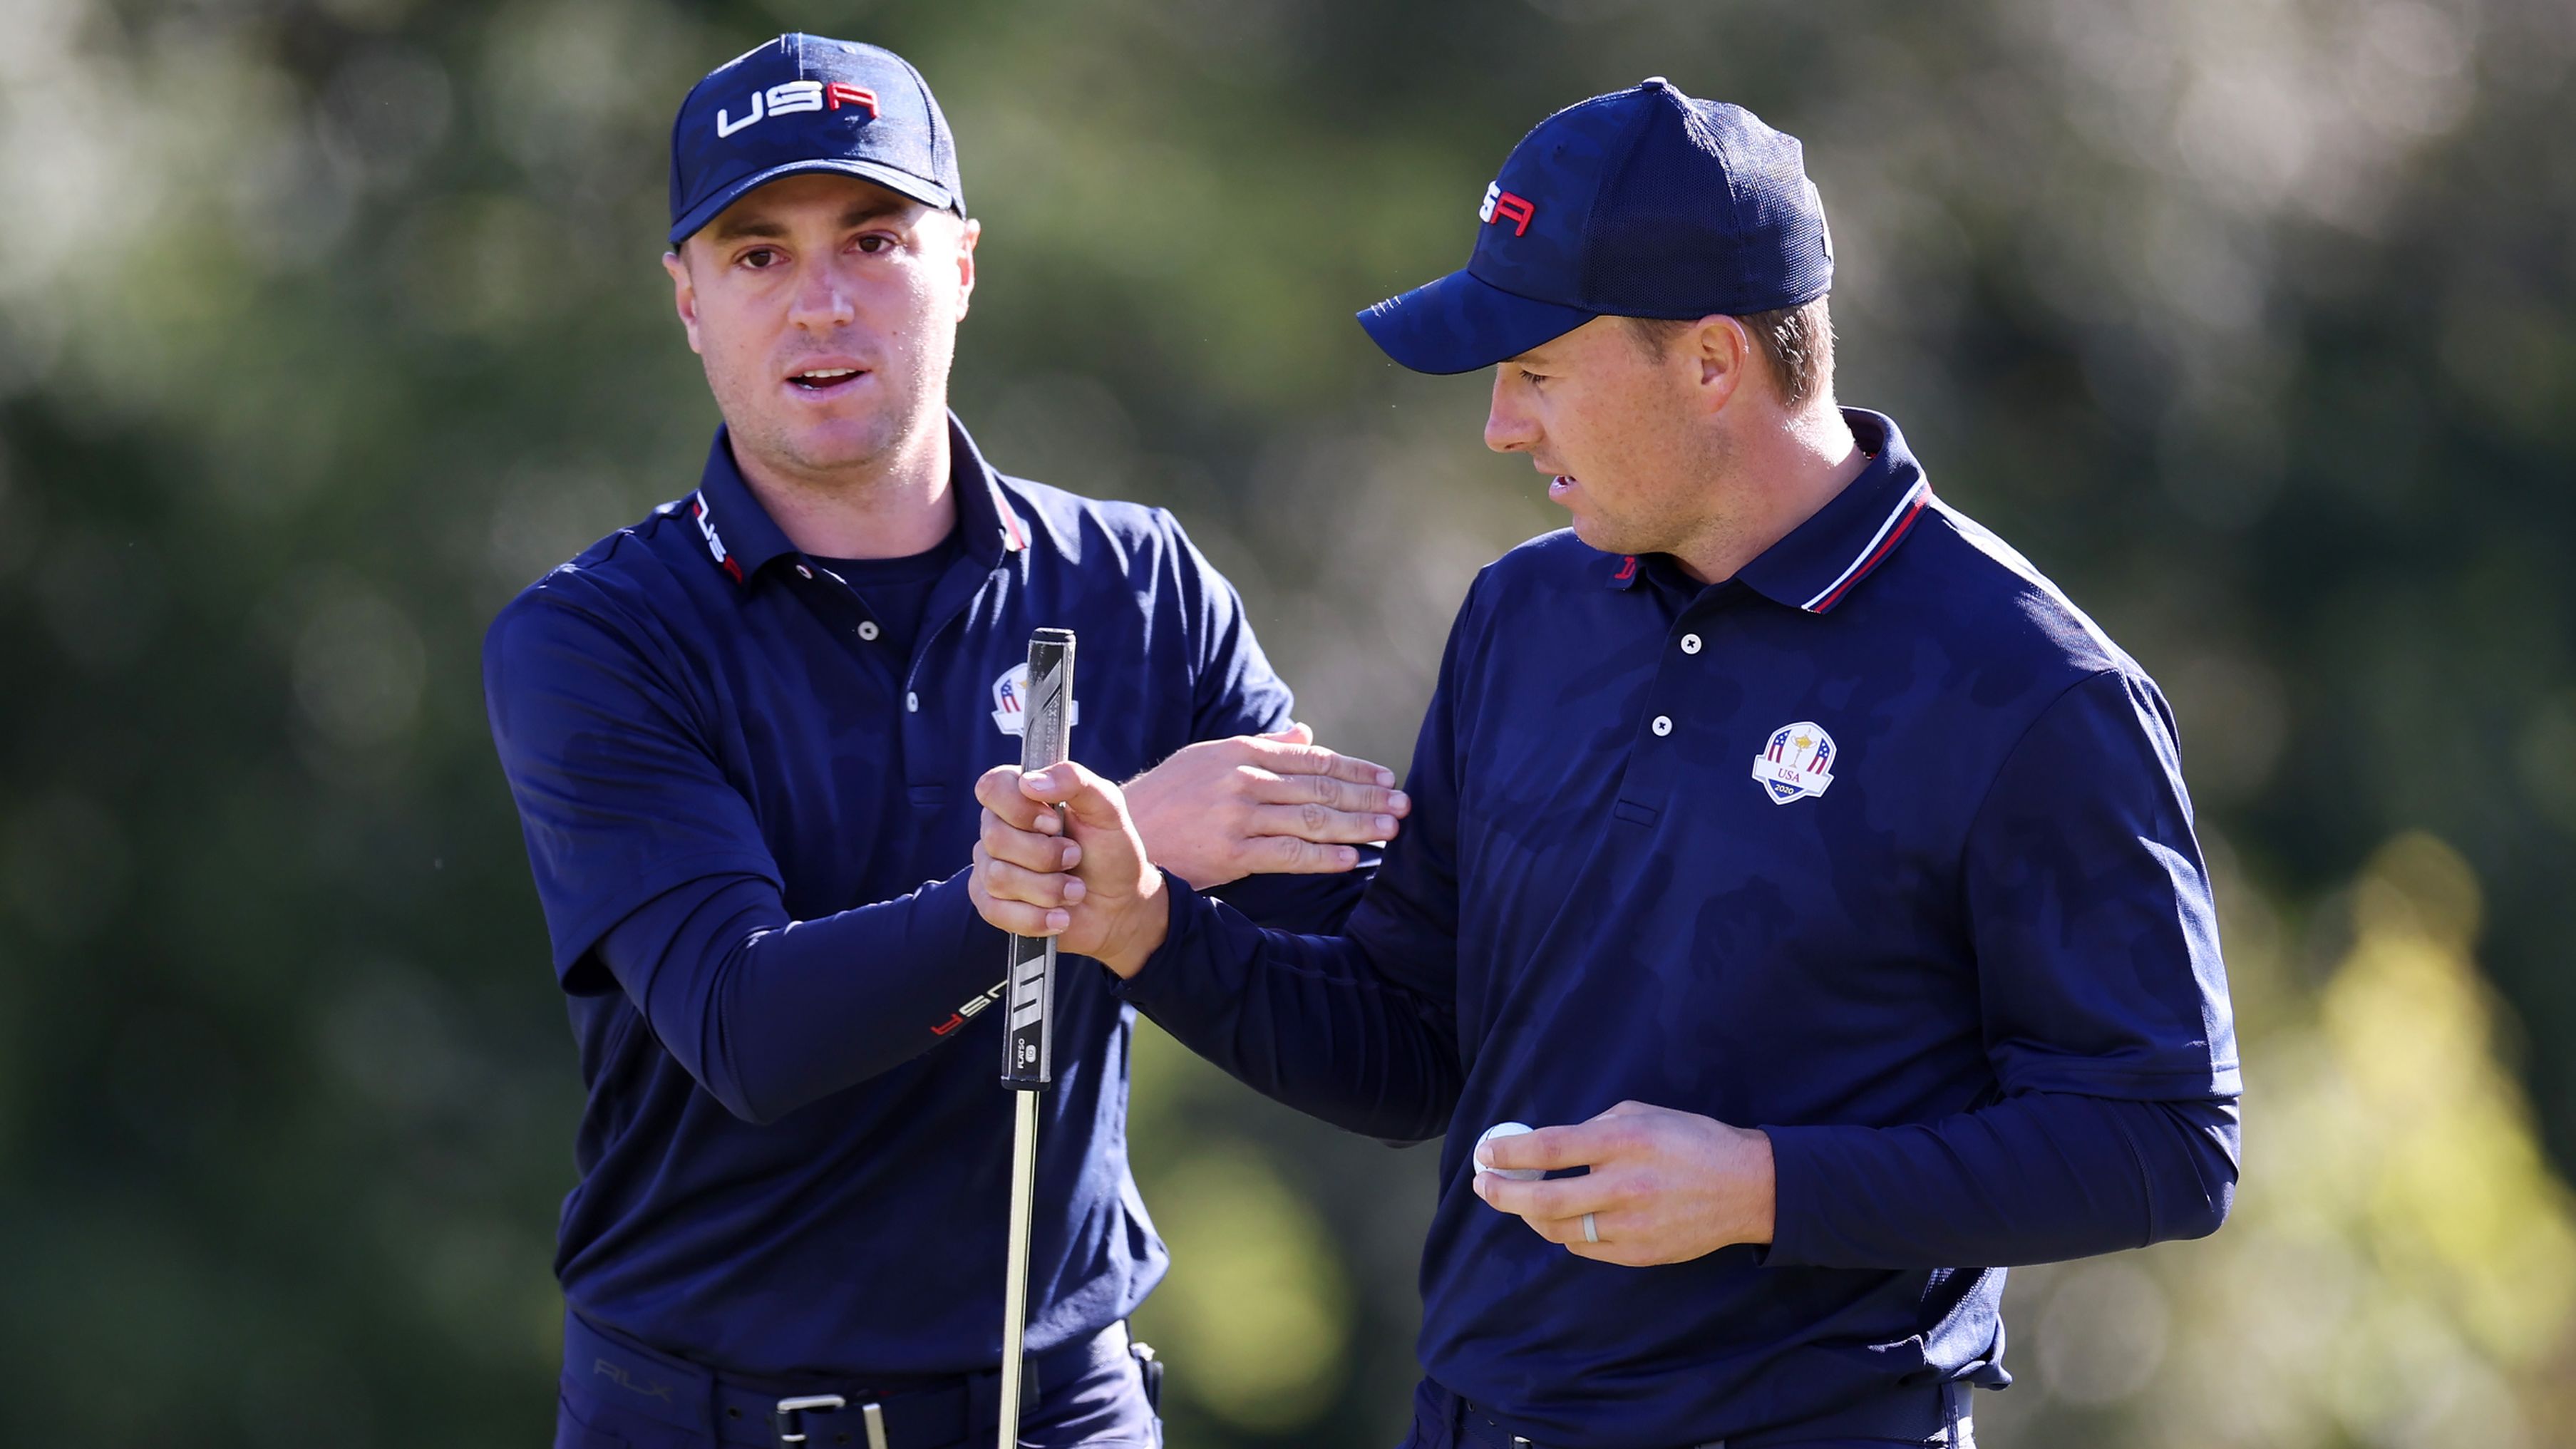 Justin Thomas of team United States (L) and Jordan Spieth during Saturday Morning Foursome Matches of the 43rd Ryder Cup at Whistling Straits.